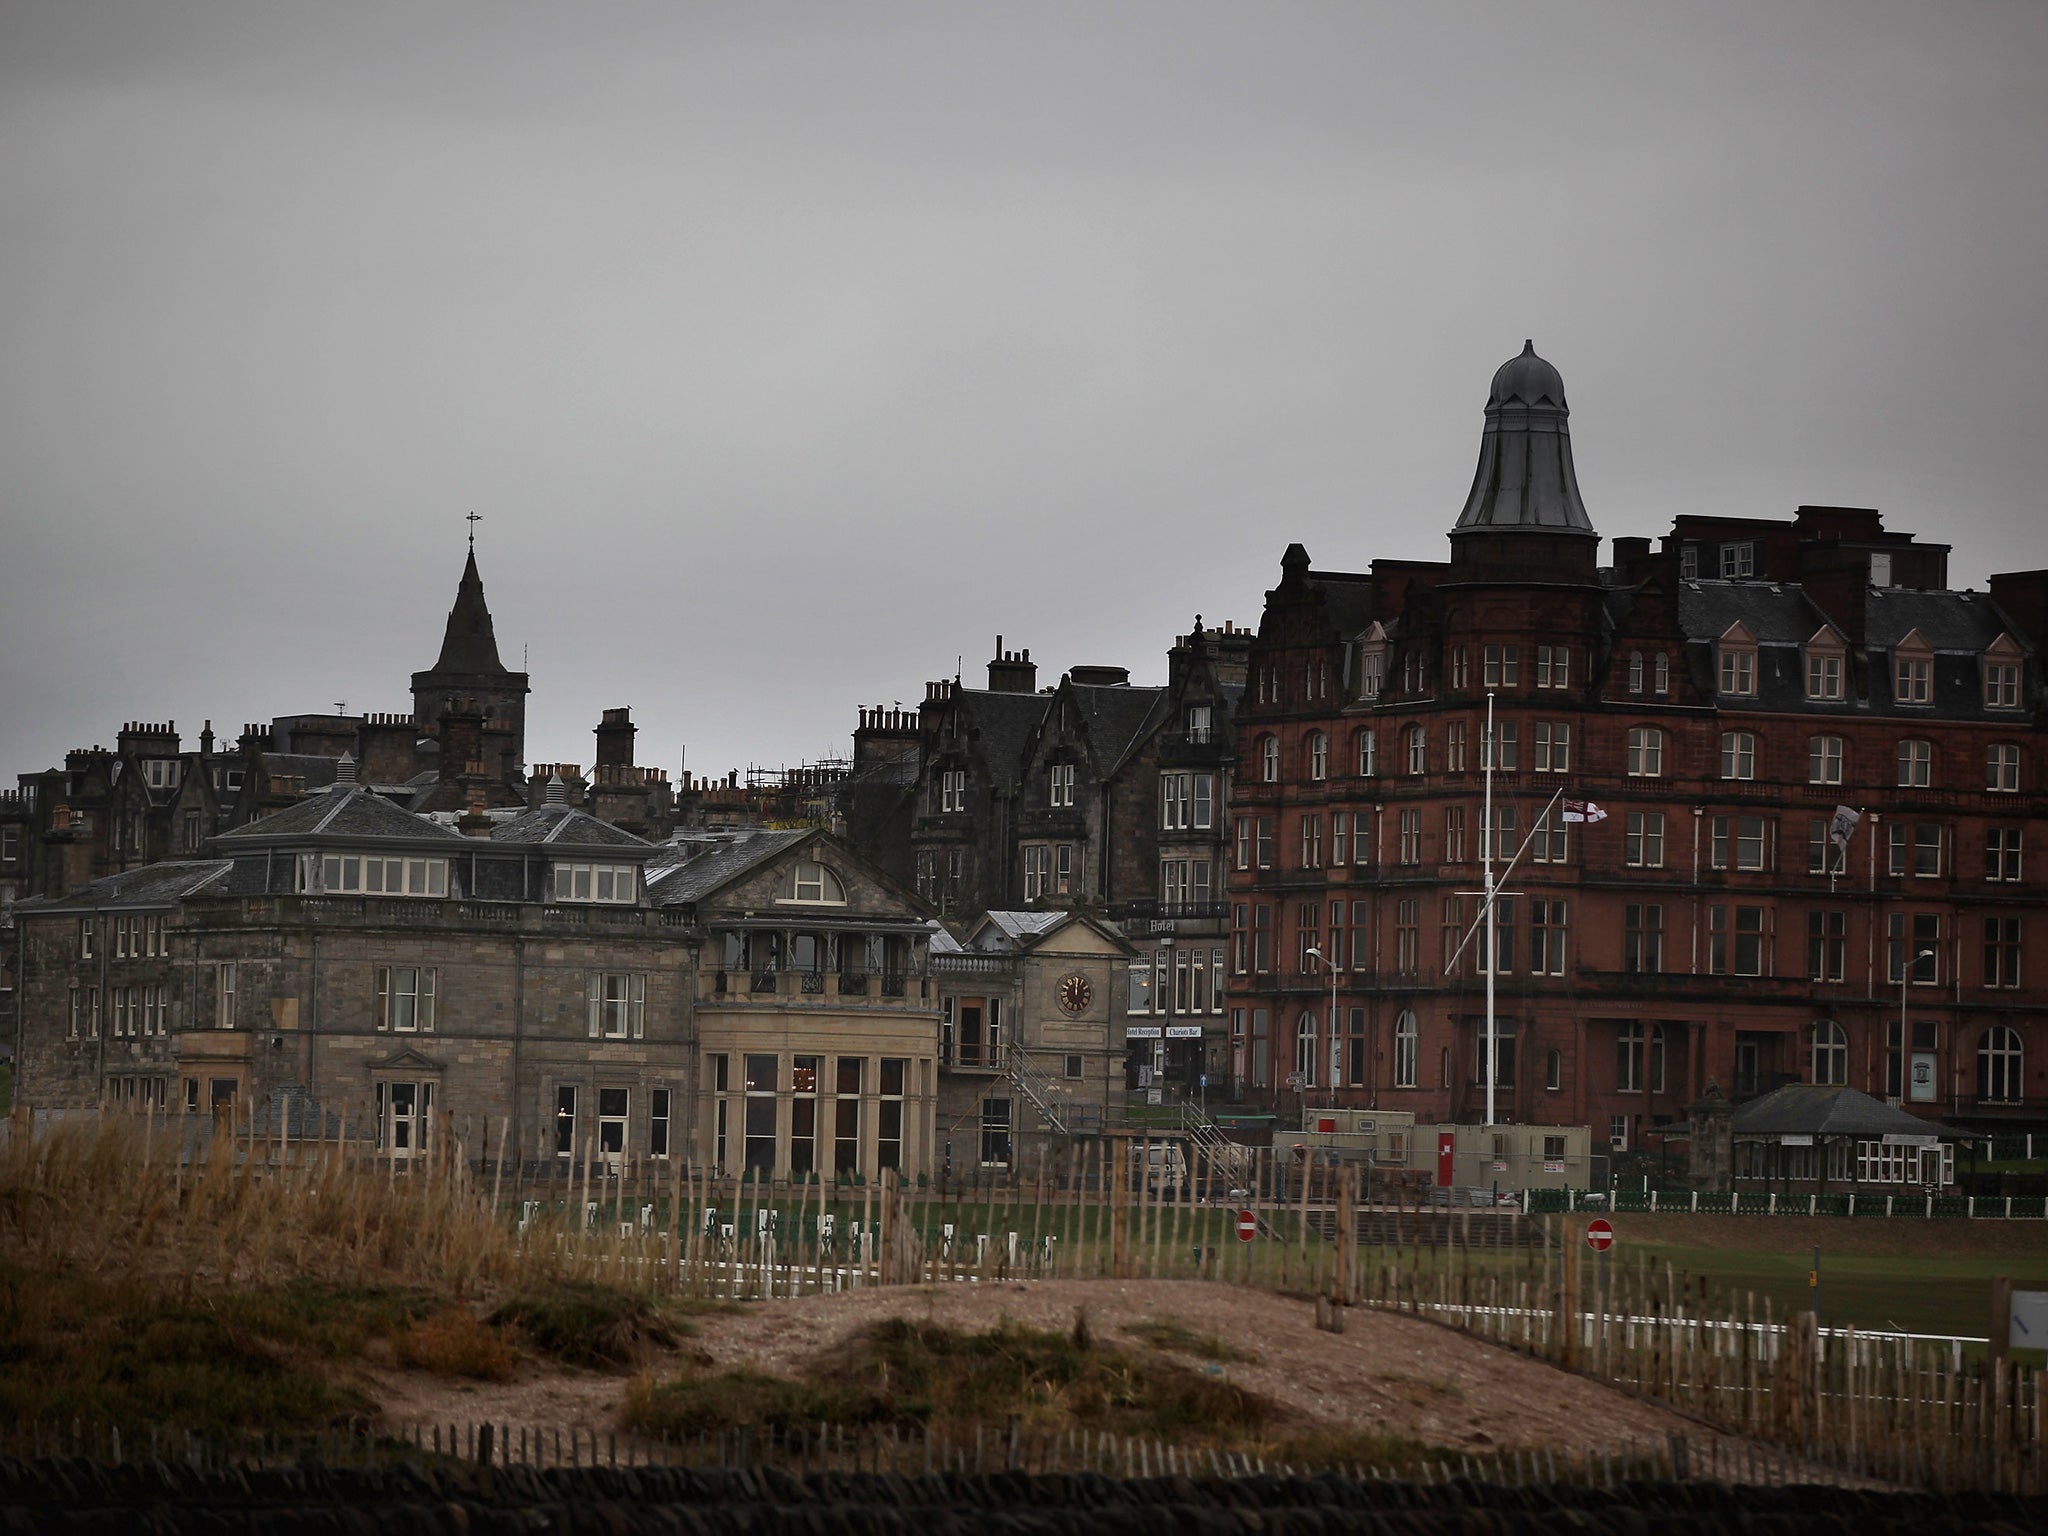 St Andrews - one of the four Scottish 'ancient' universities